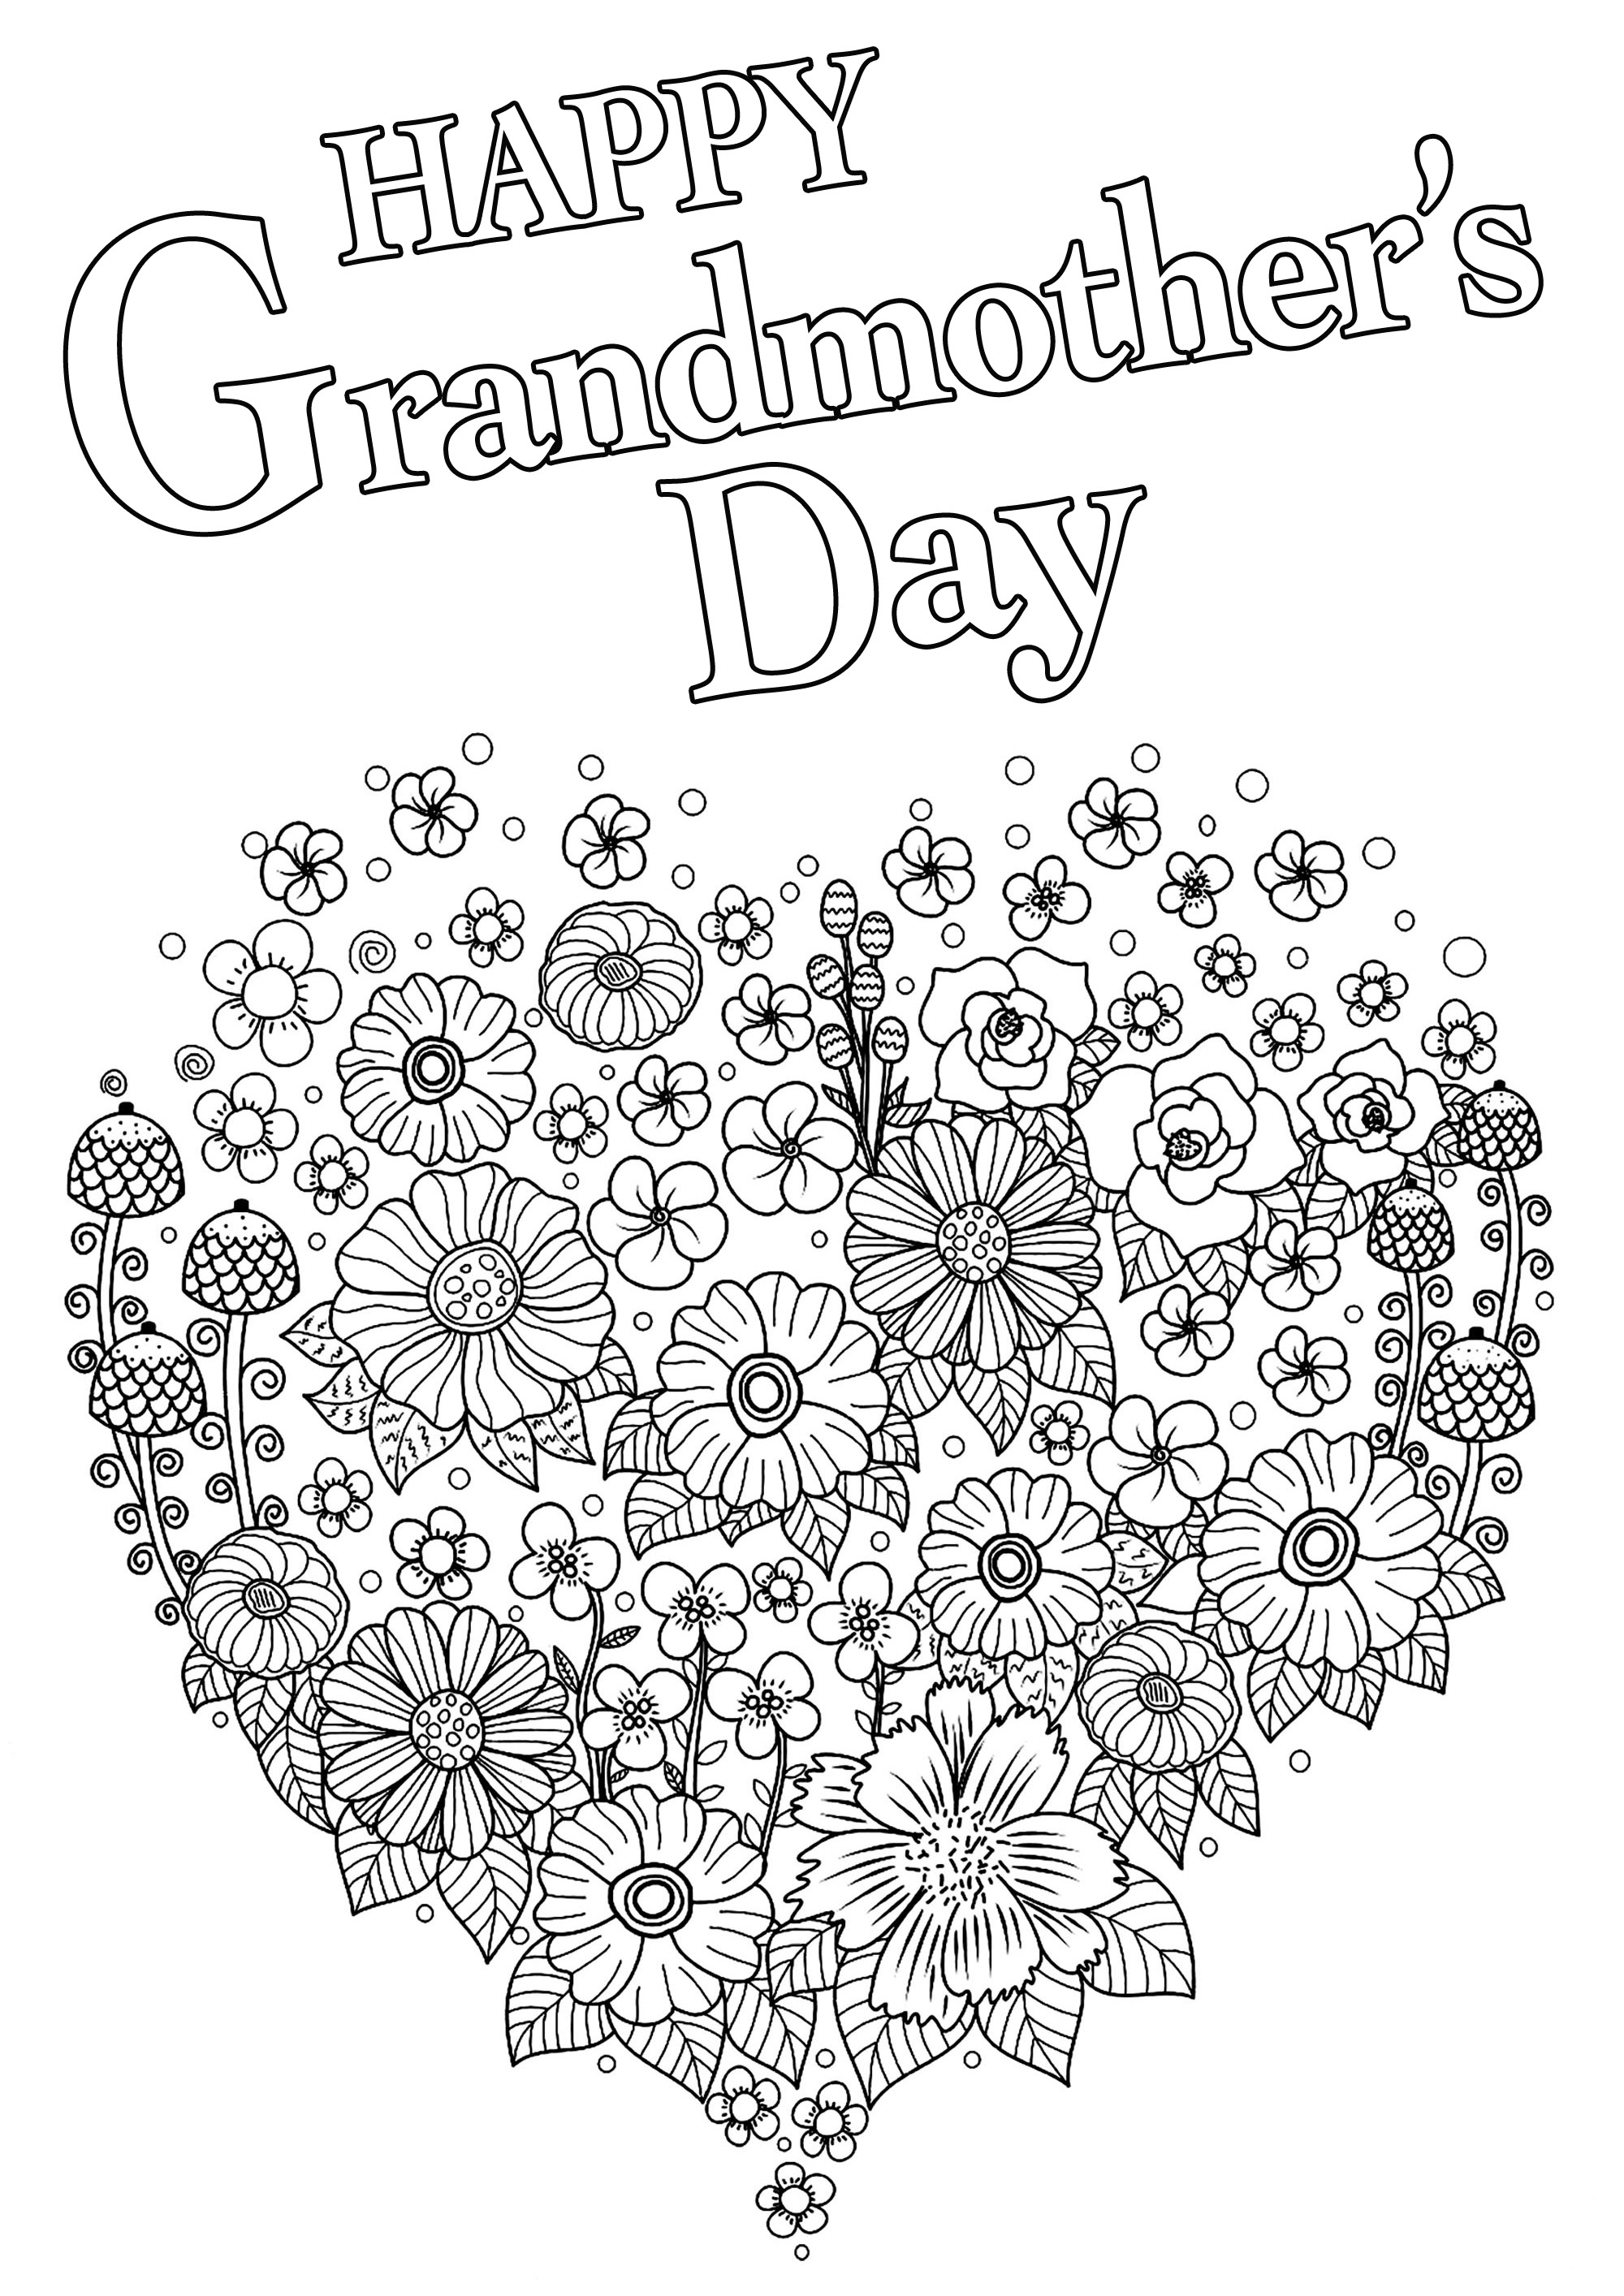 Happy Grandmother s Day With Heart Full Of Flowers Grandparents Day